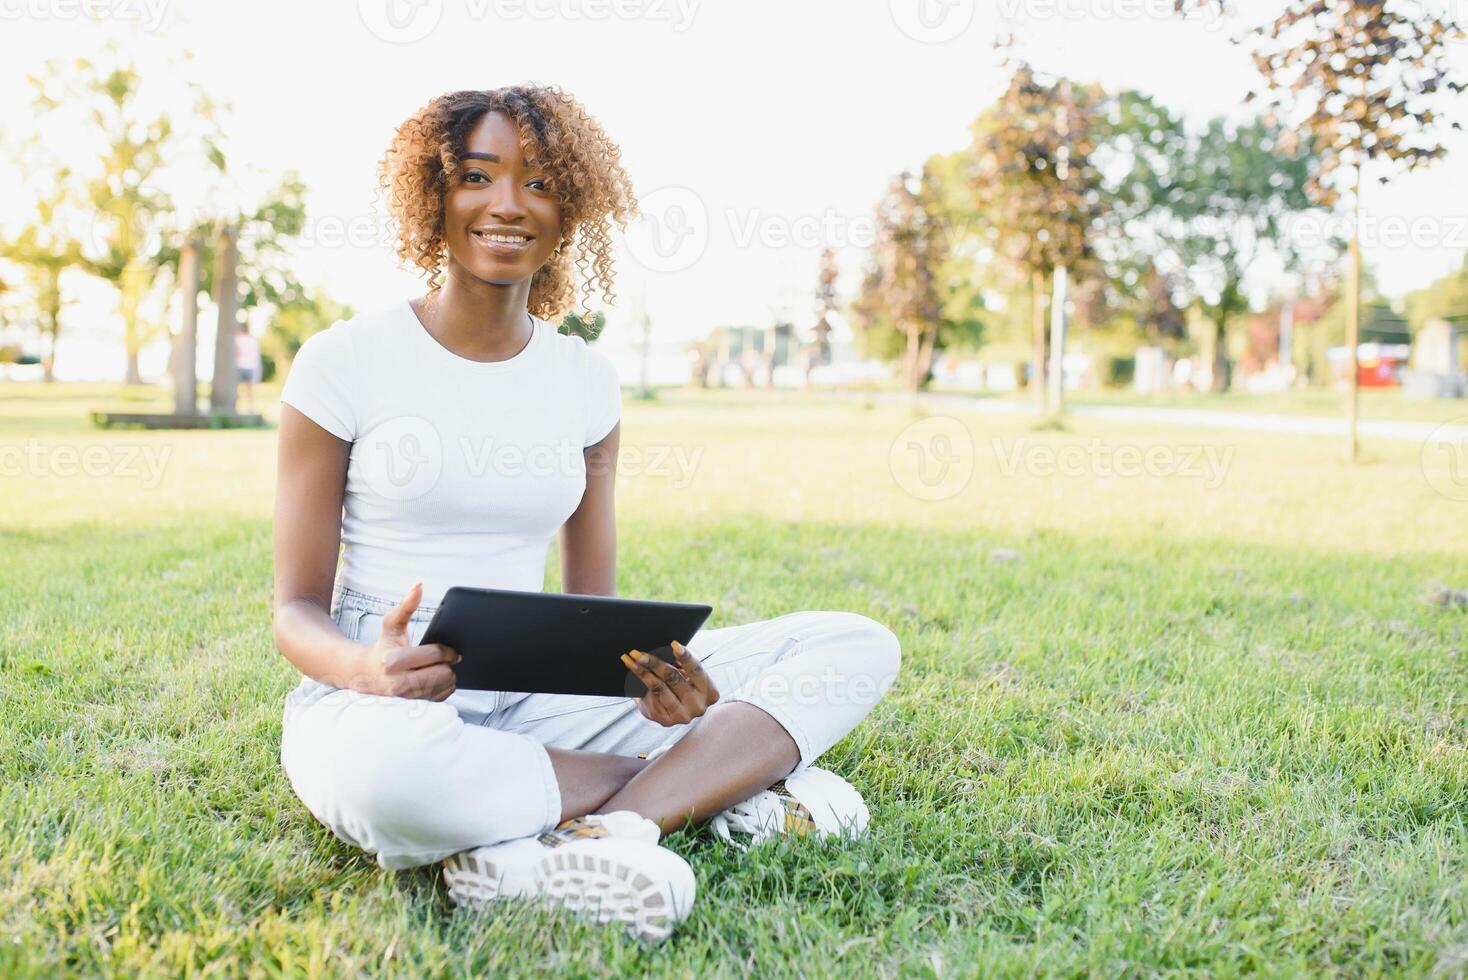 Thoughtful cute mixed female international student with curly hair is sitting on fresh grass with modern laptop in public park, leaning on apple tree and wistfully looking aside during her break photo